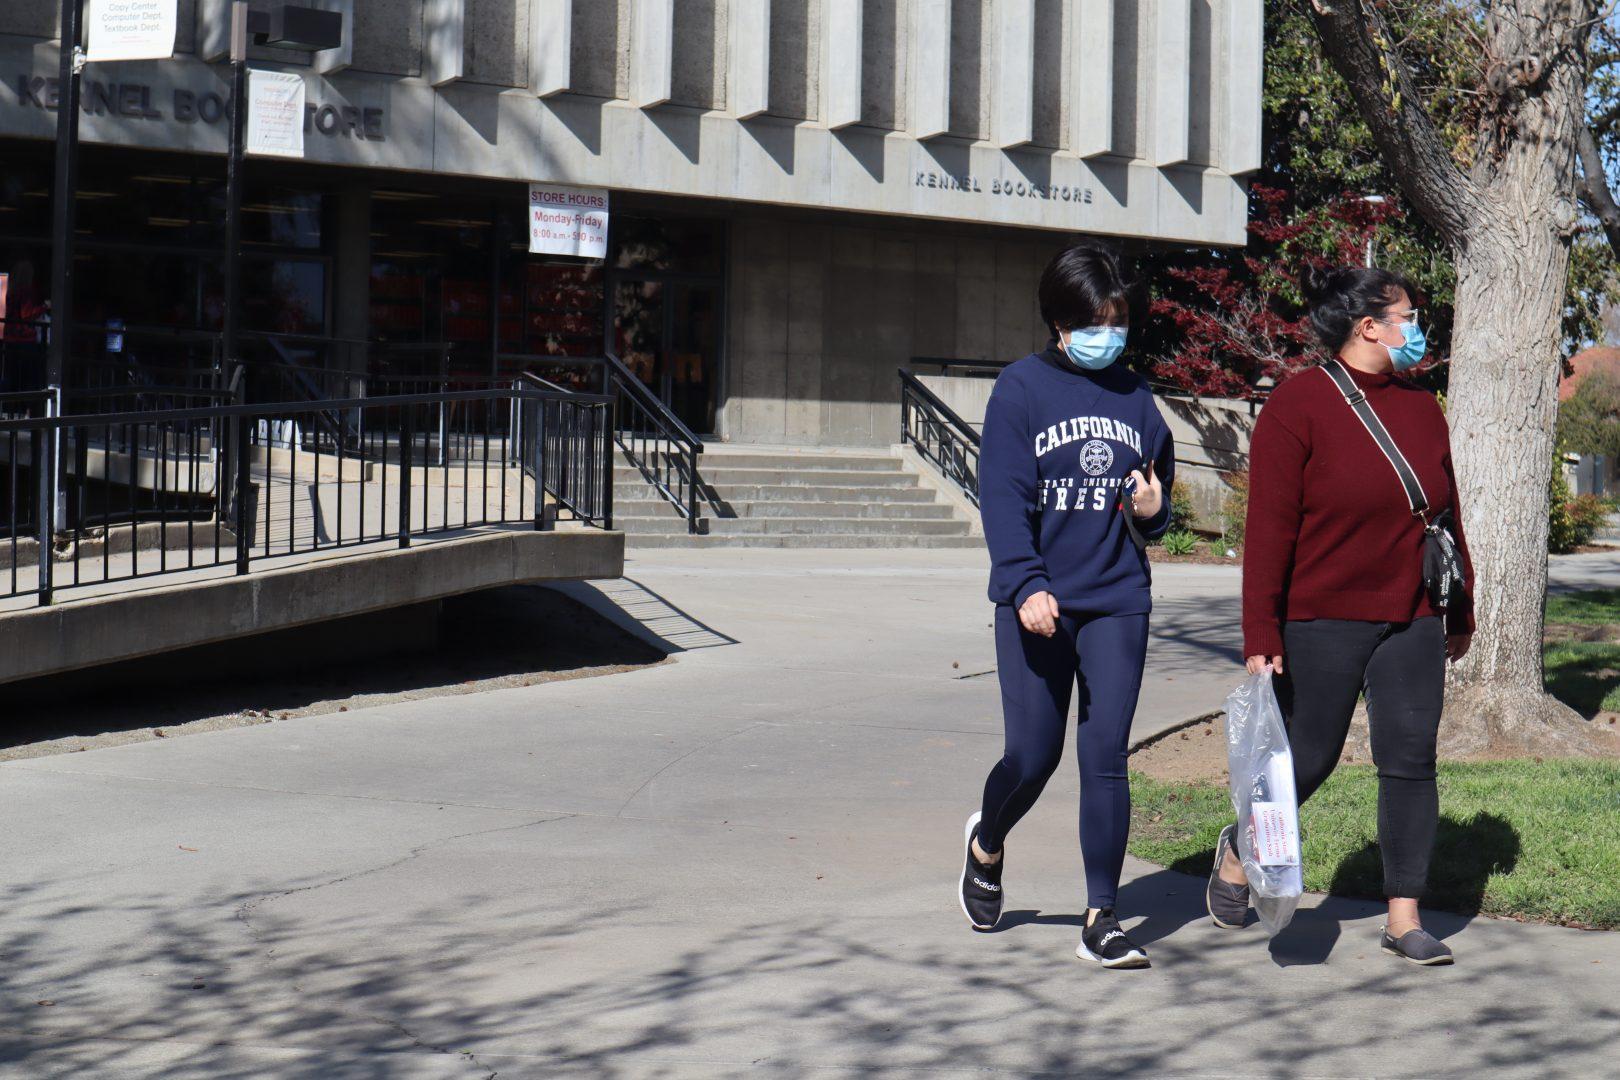 Two Fresno State students leave the Kennel Bookstore on March 23, 2021, at Fresno State. (Kameron Thorn / The Collegian)